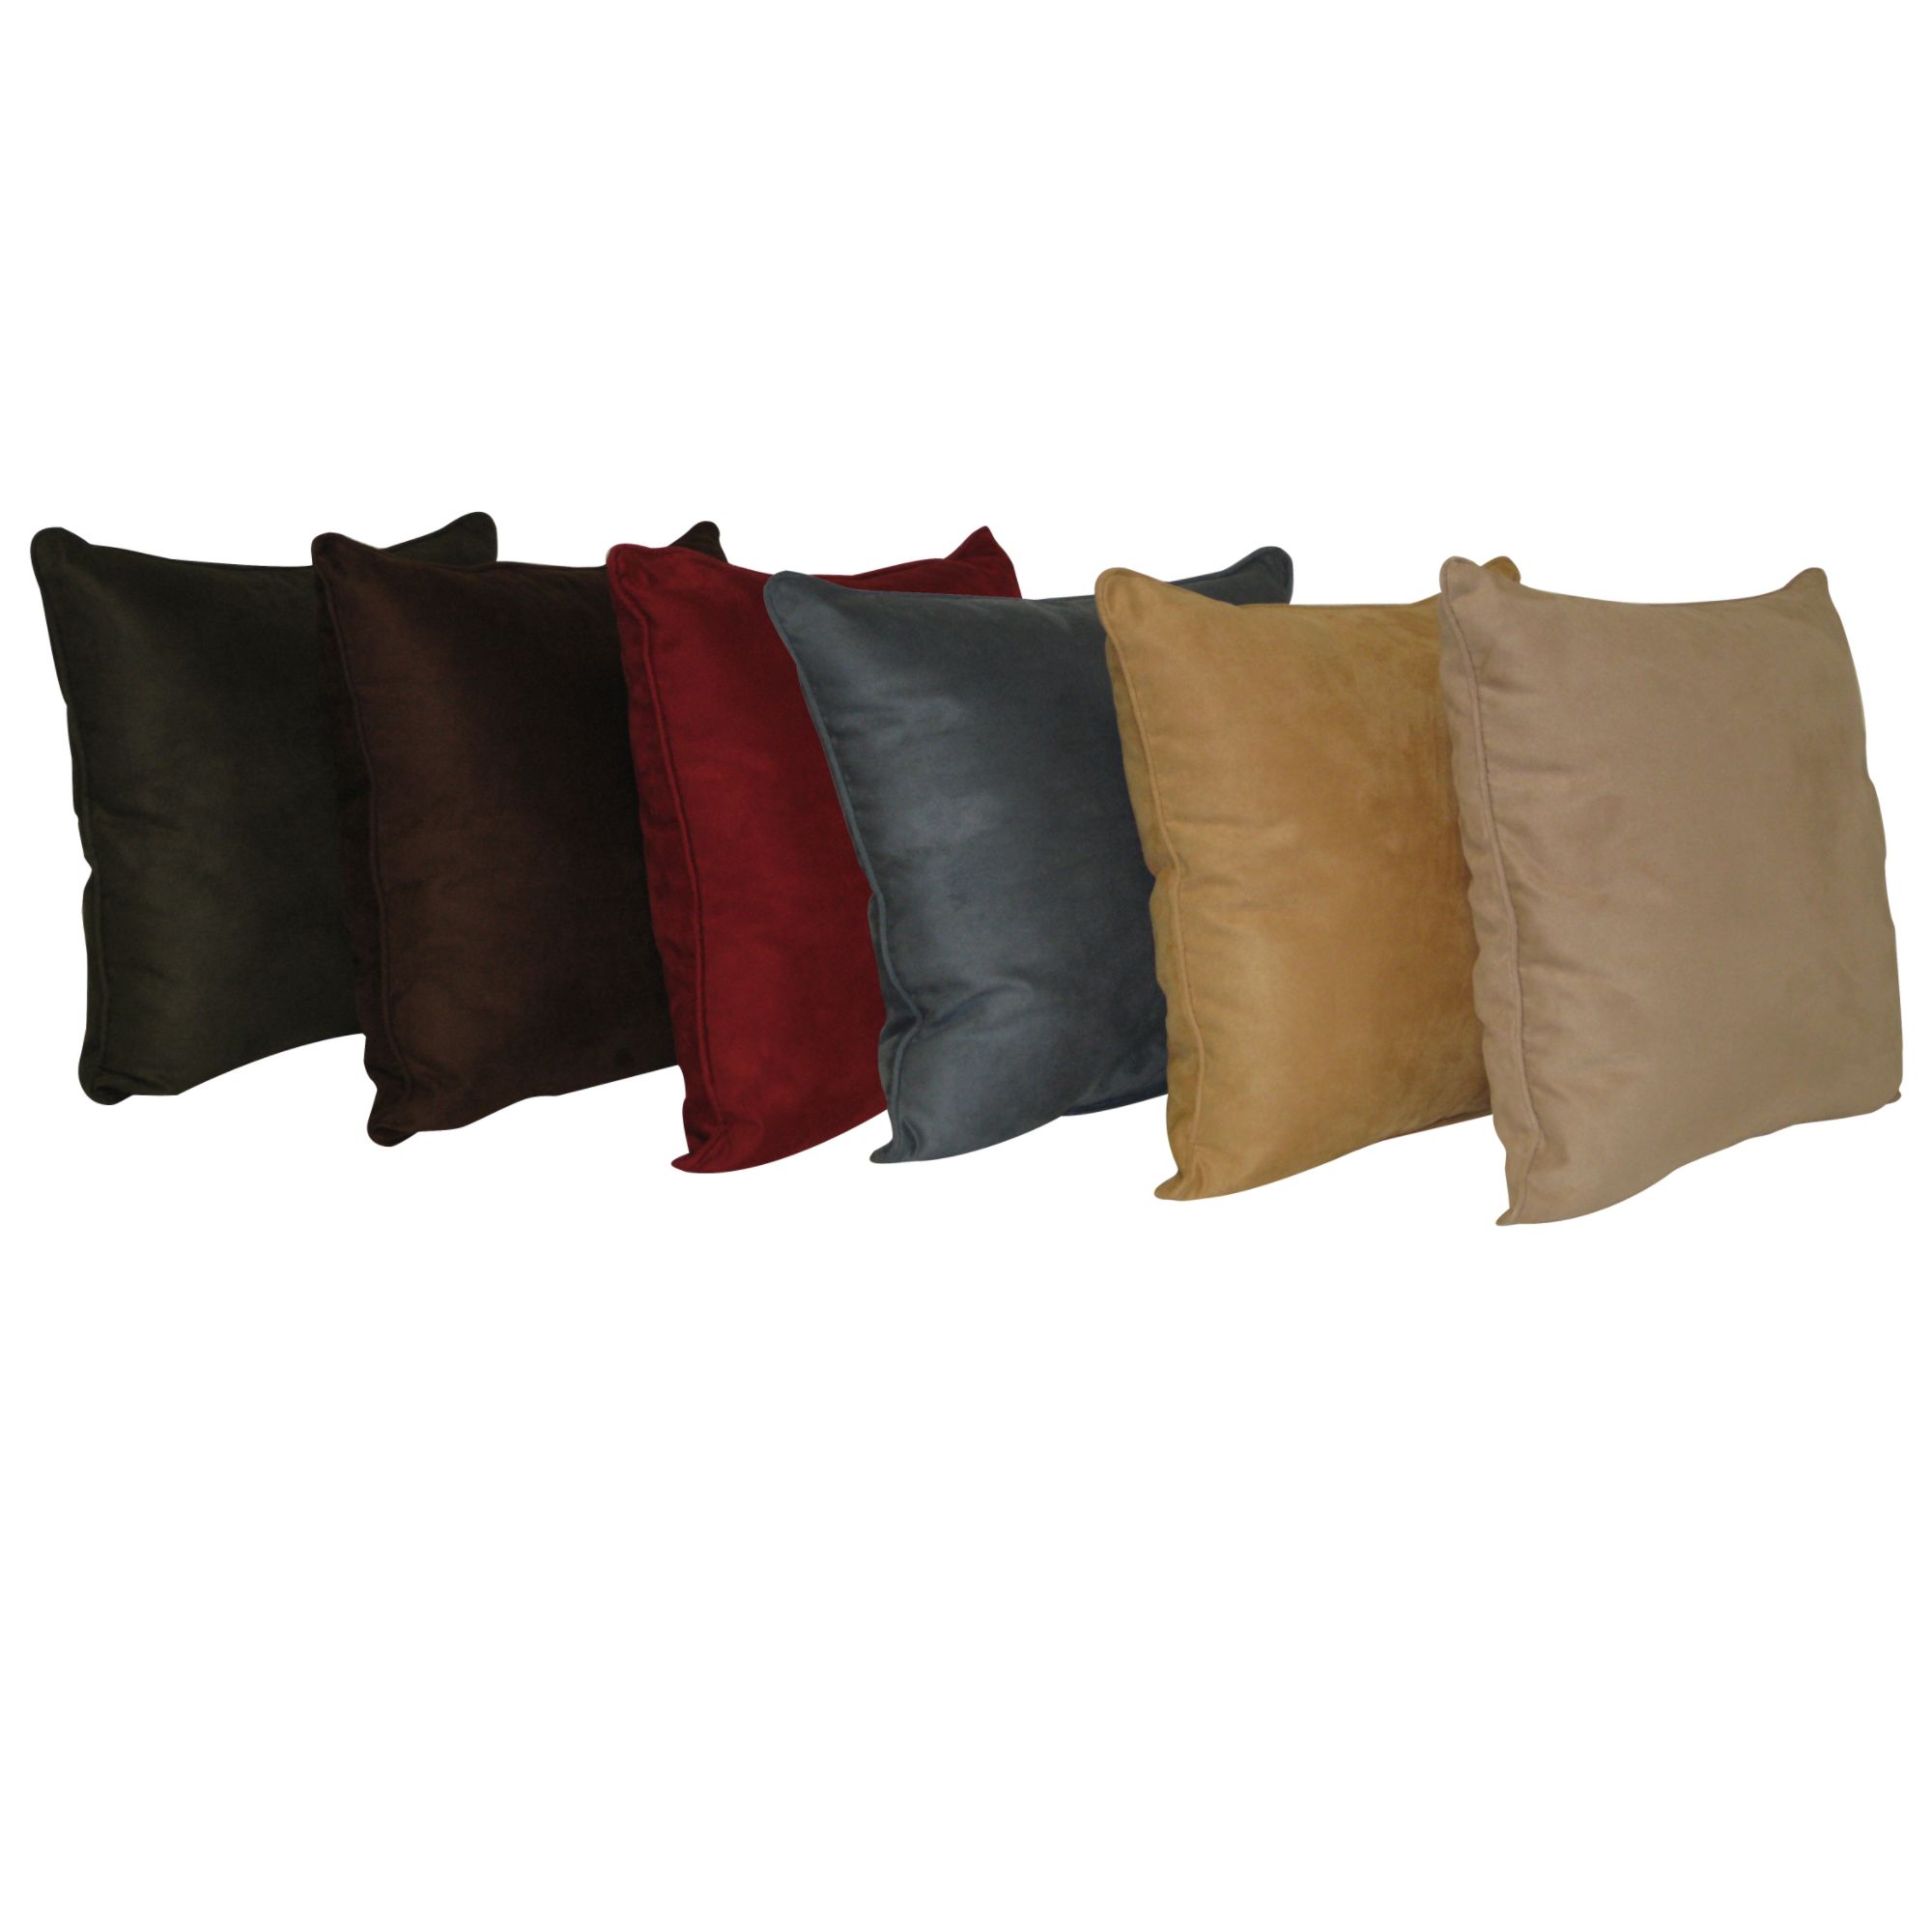 Whole Home Suede Decorative Pillow Collection